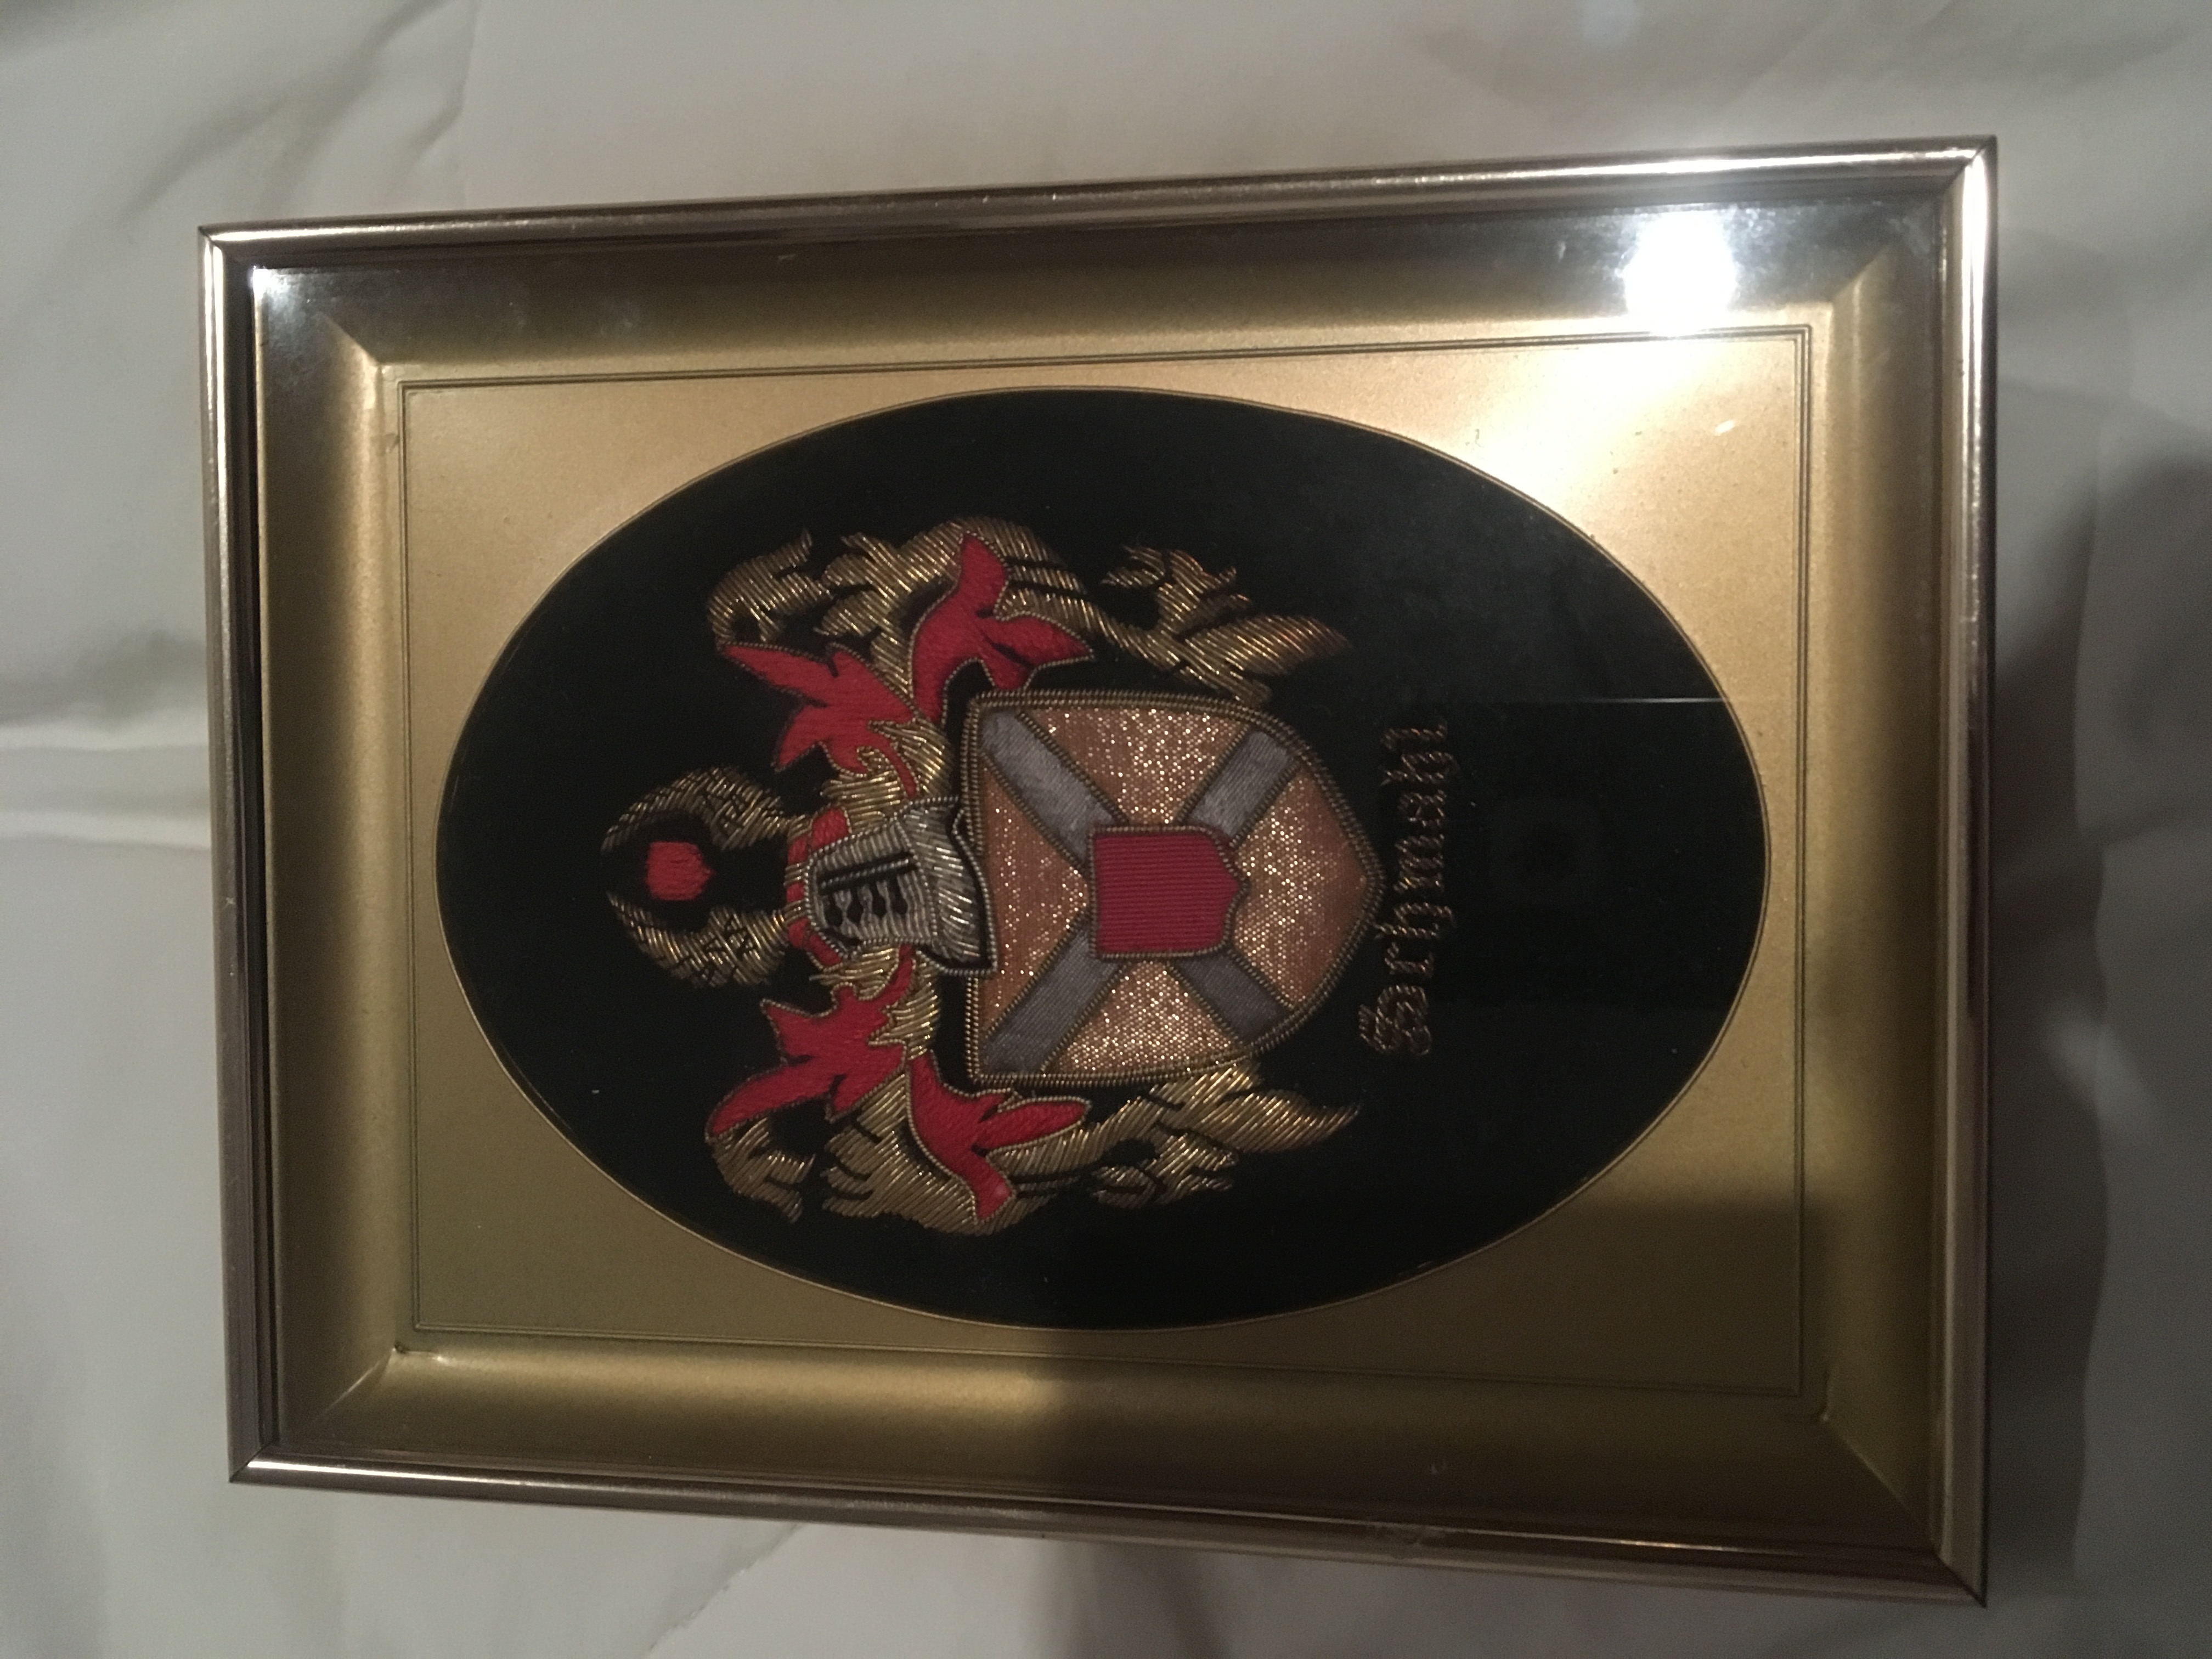 Hello everybody, someone I know (of German descent) has been told that these are his family arms.

From the image, it looks like the blazon of the arms is 